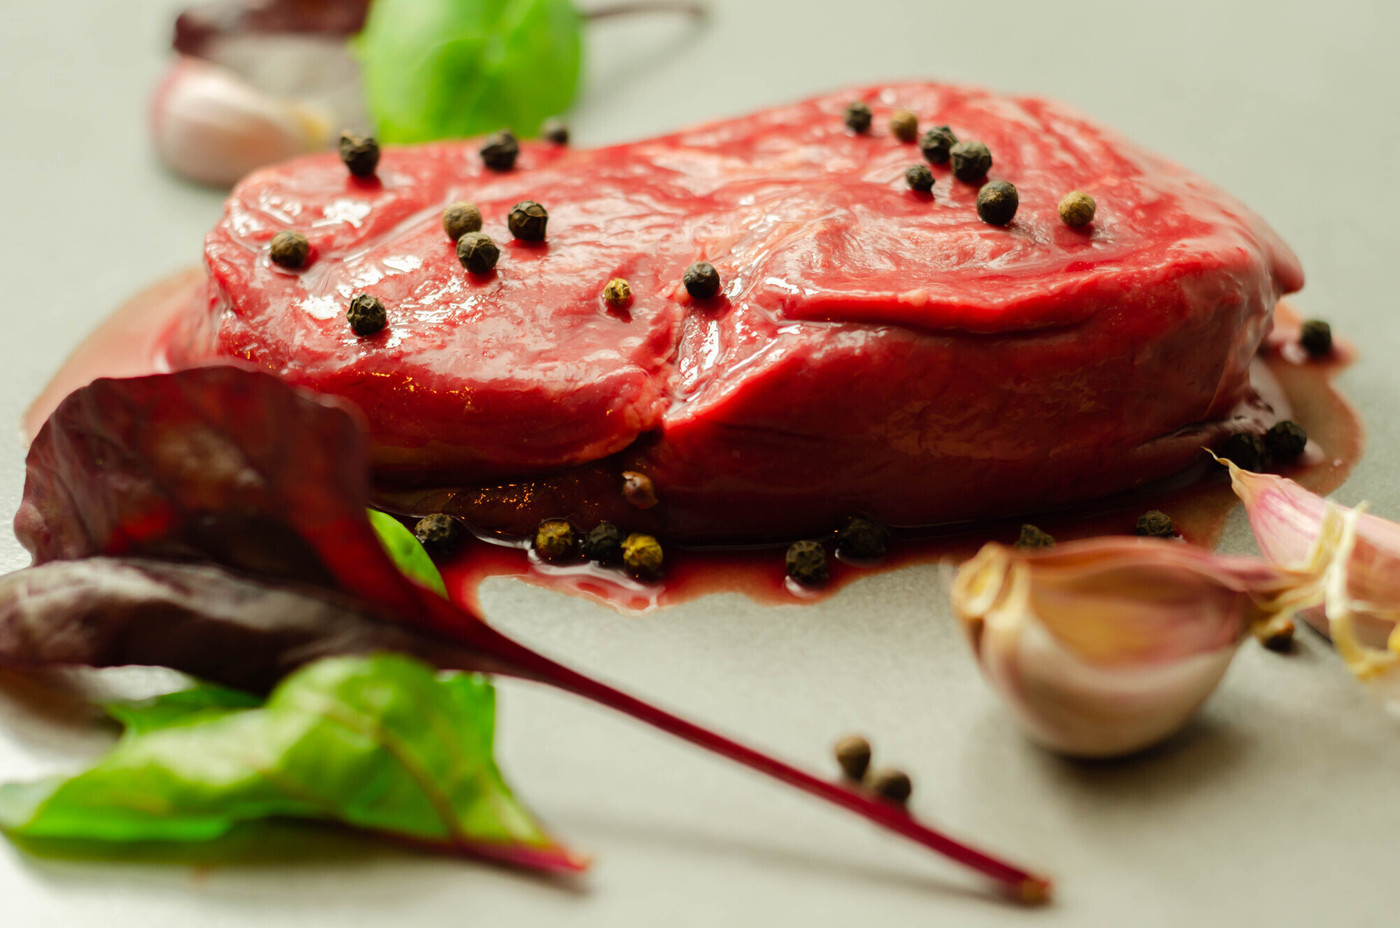 Raw beef sirloin steak with peppercorns and garlic prepared for frying